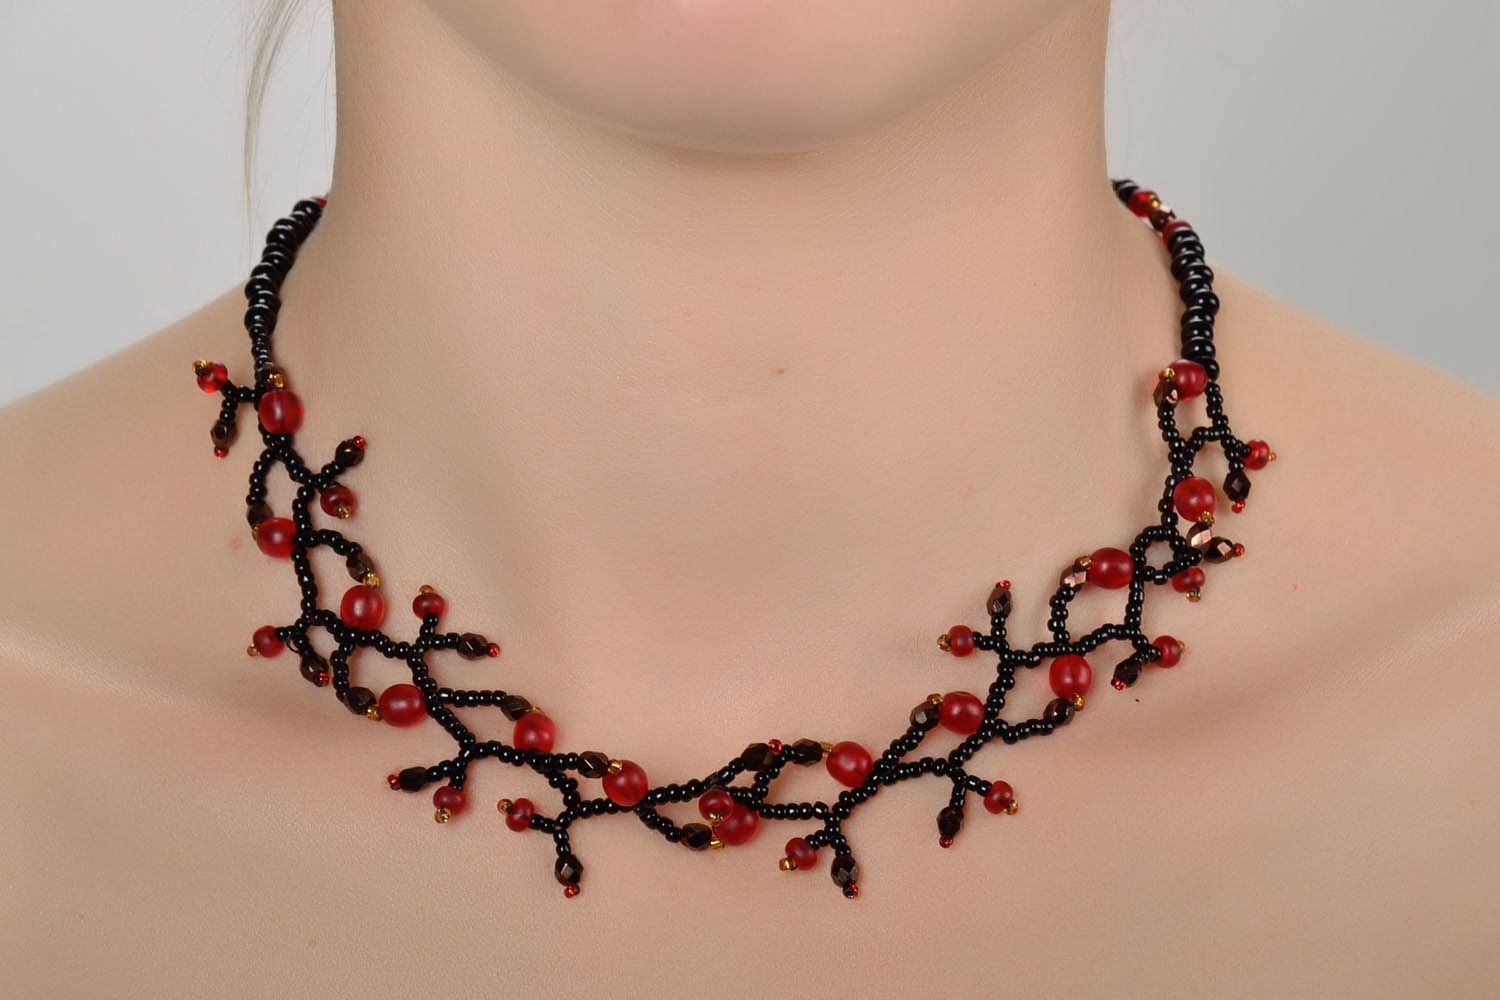 Black and red necklace made of beads photo 1